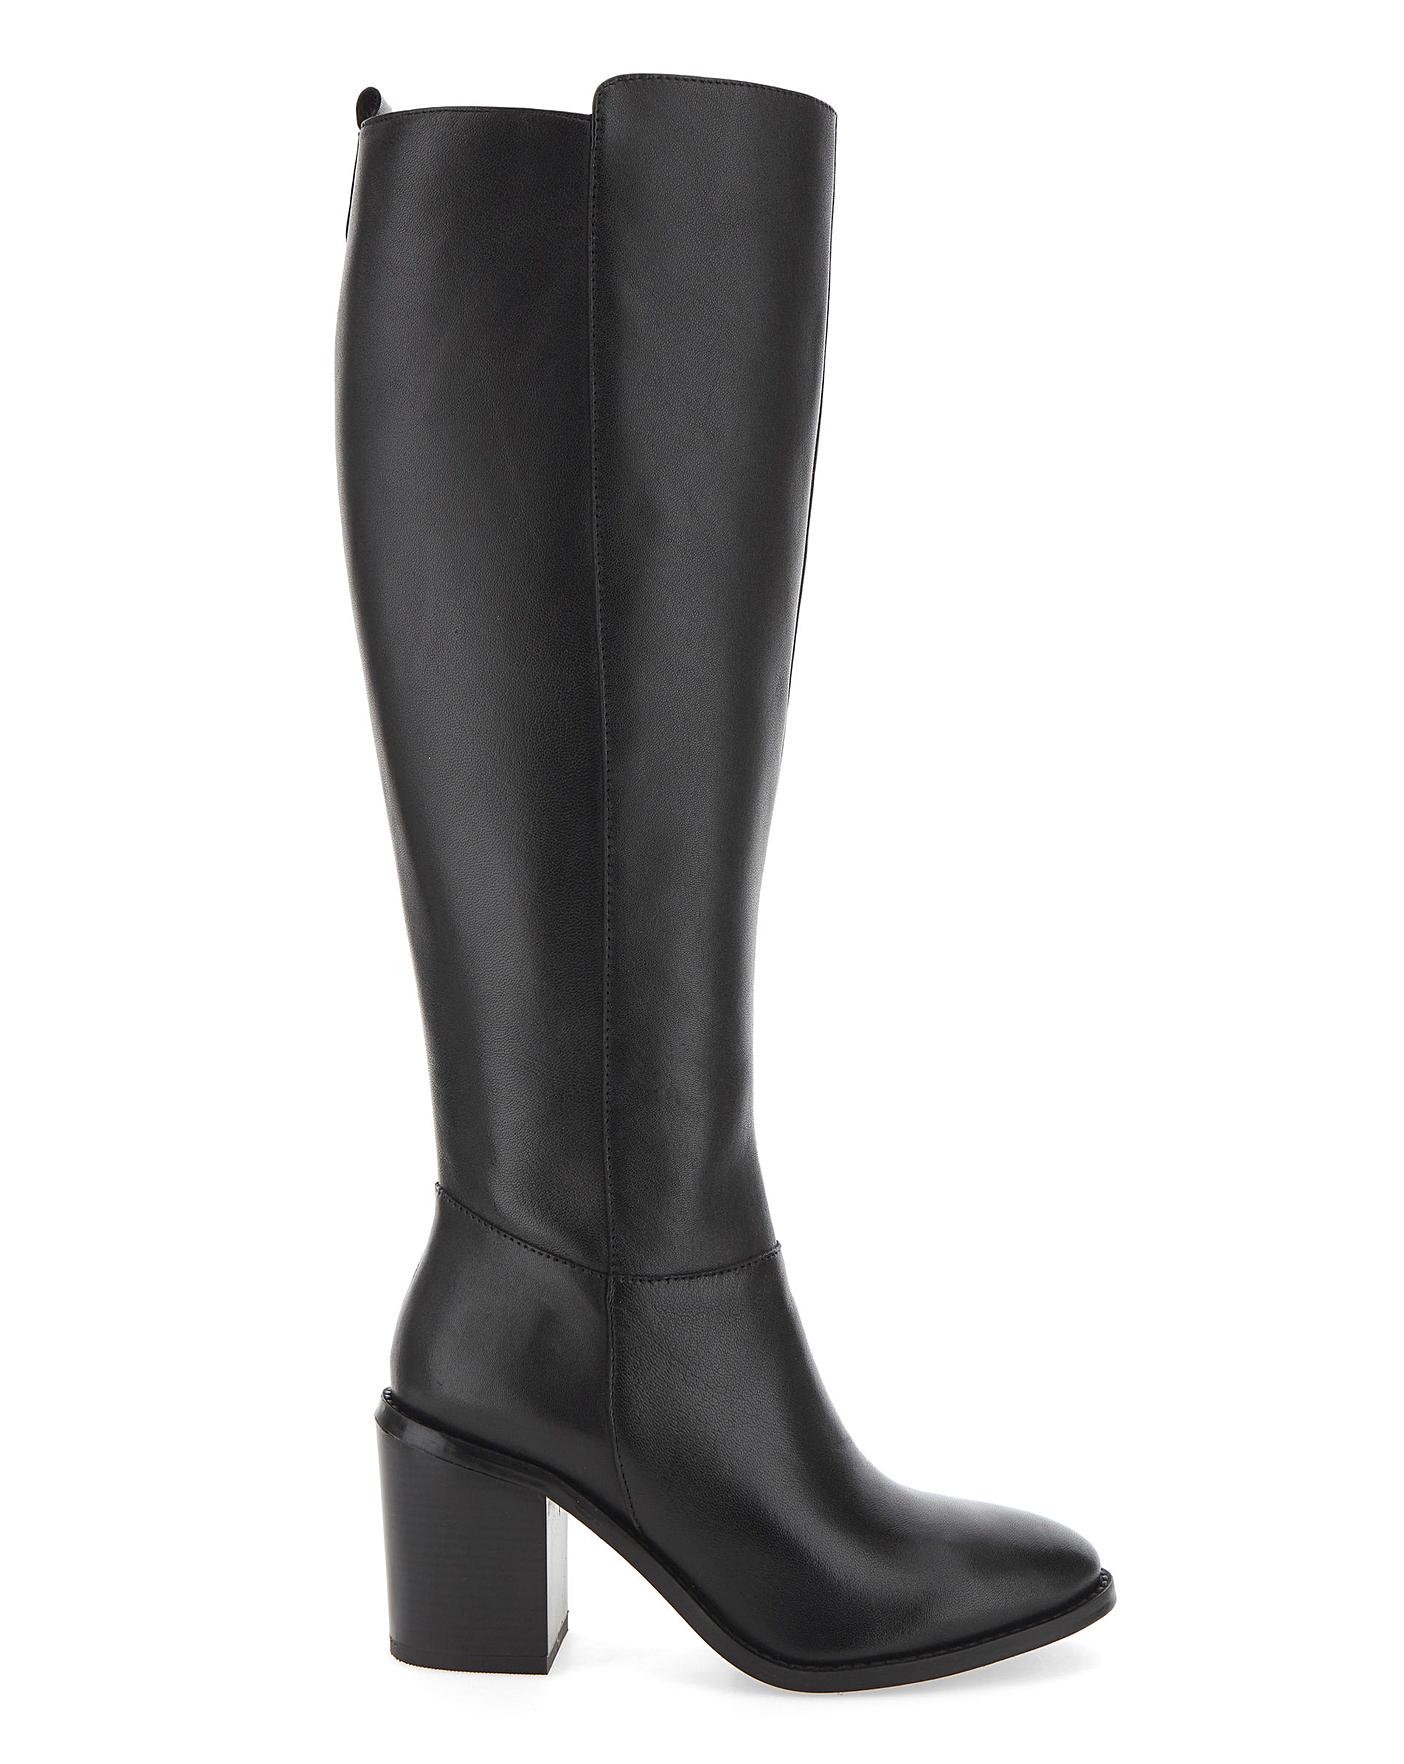 wide fitting knee high boots